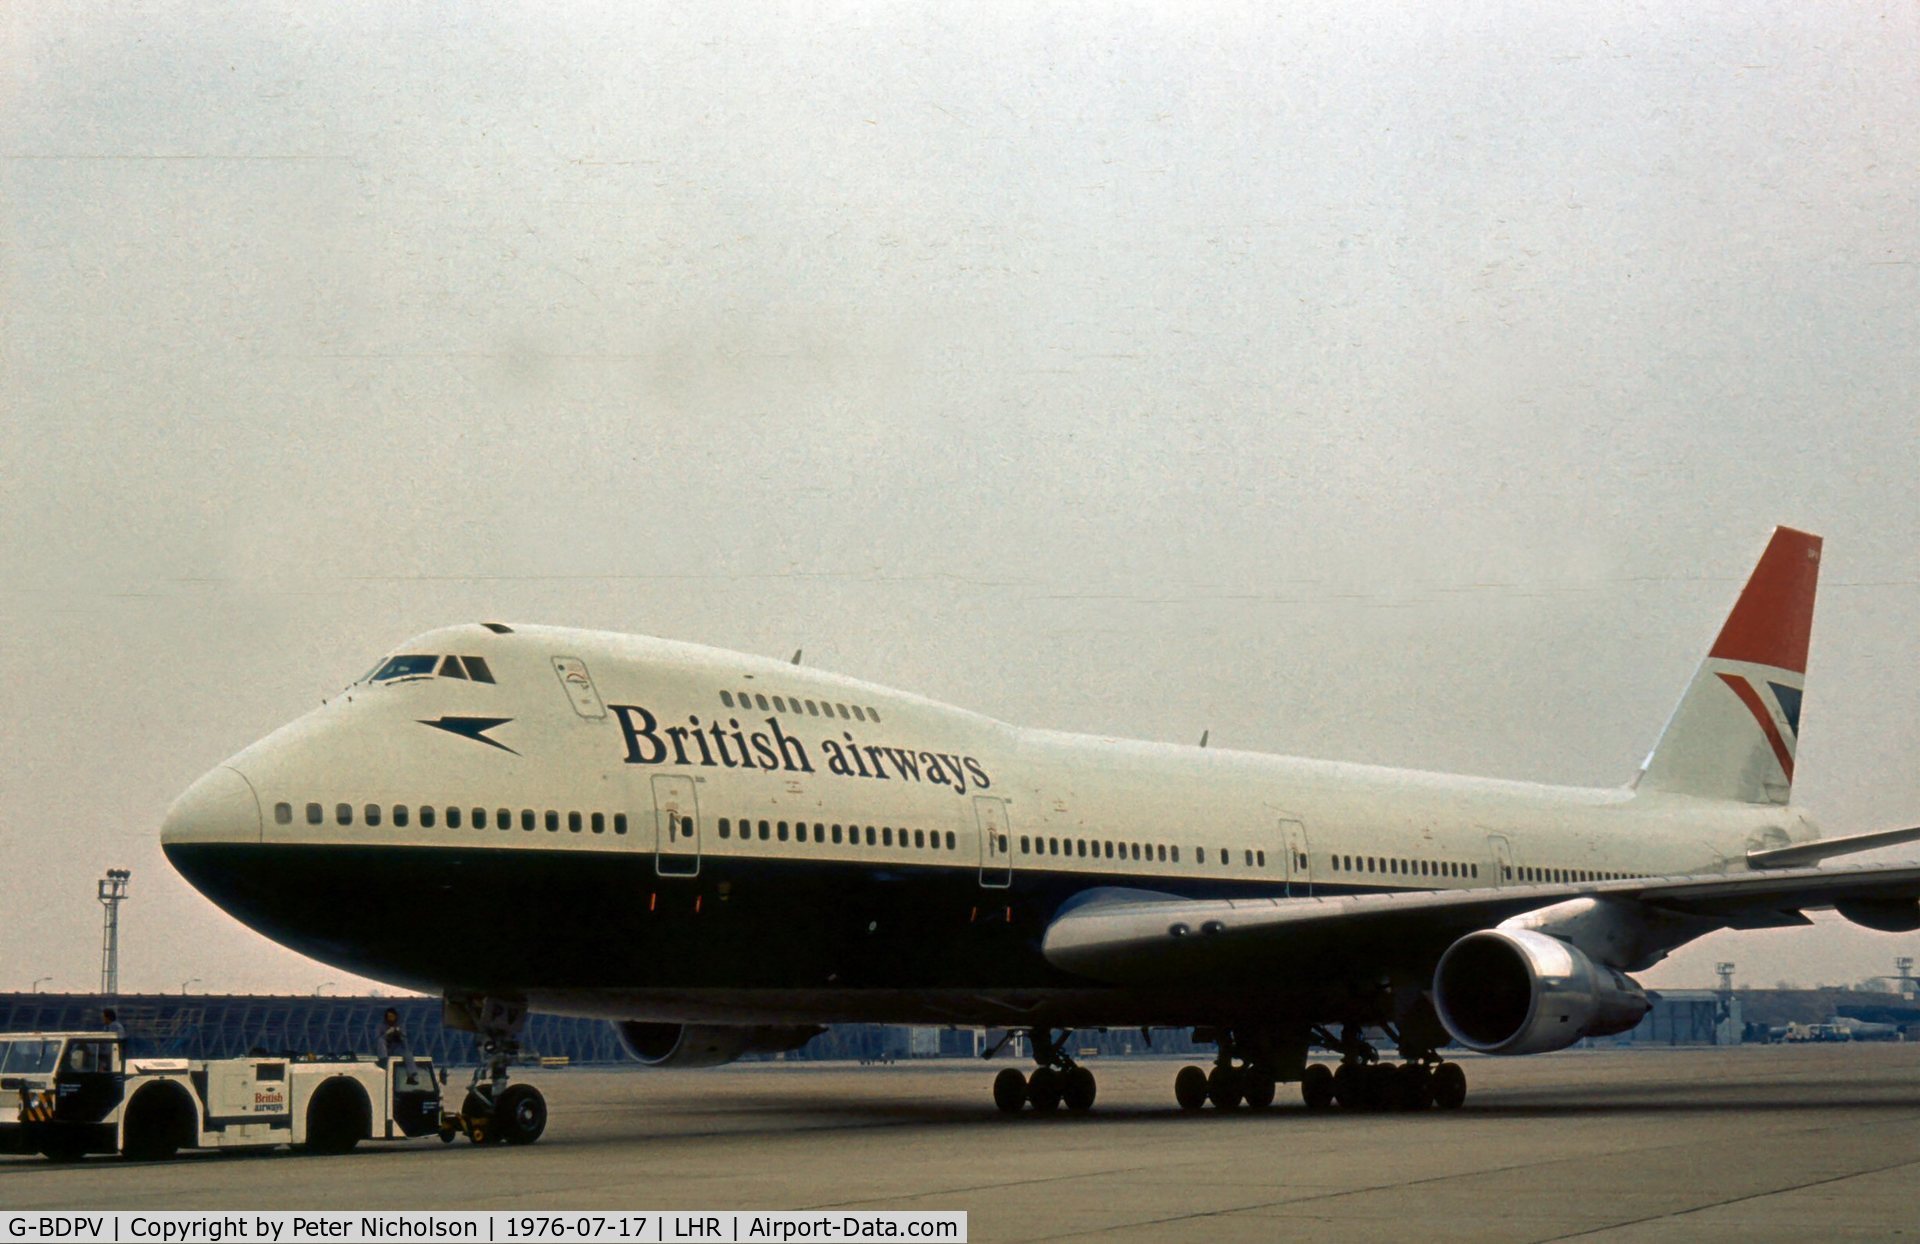 G-BDPV, 1976 Boeing 747-136 C/N 21213, In service with British Airways as seen at London Heathrow in the Summer of 1976.